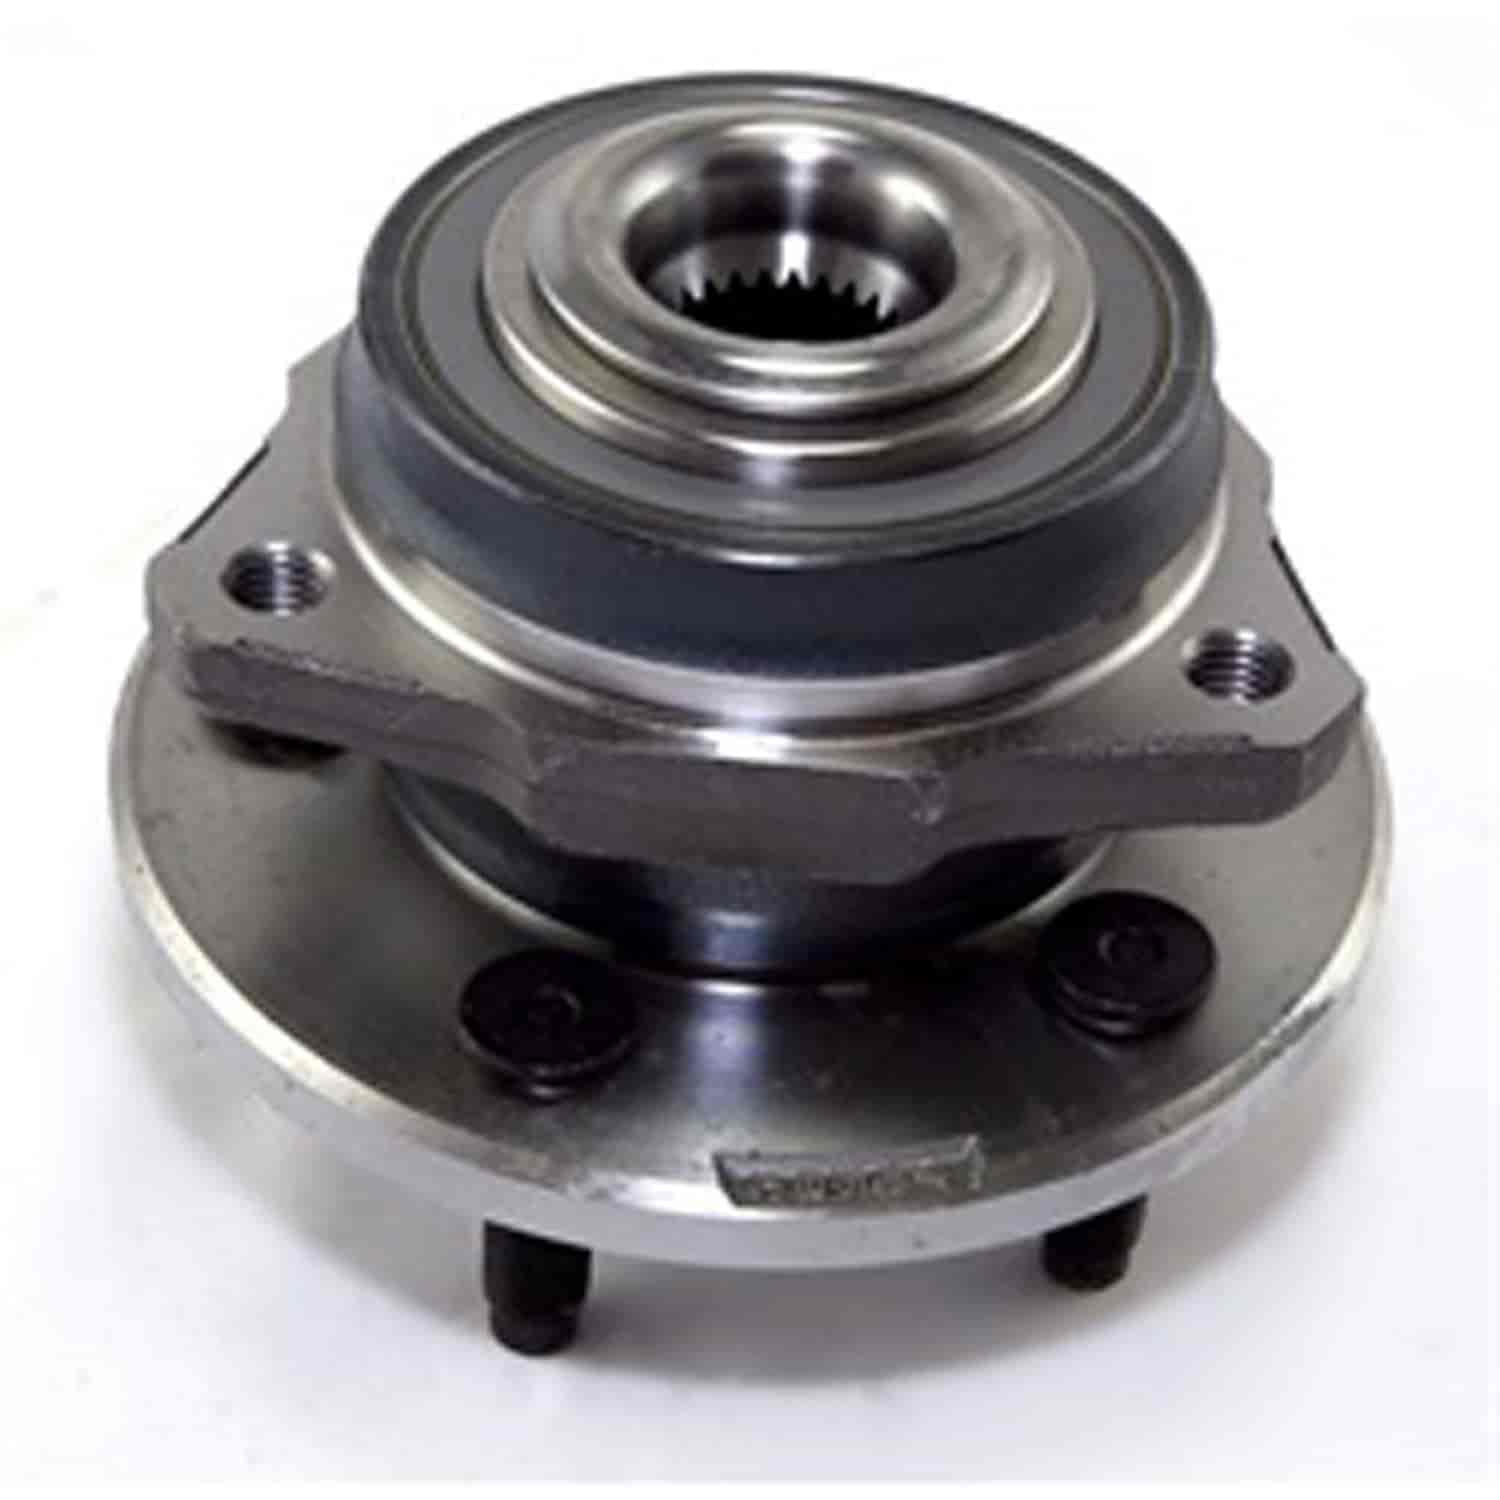 This front axle hub assembly from Omix-ADA fits 02-05 Jeep Liberty KJ without ABS. Fits left or right side.